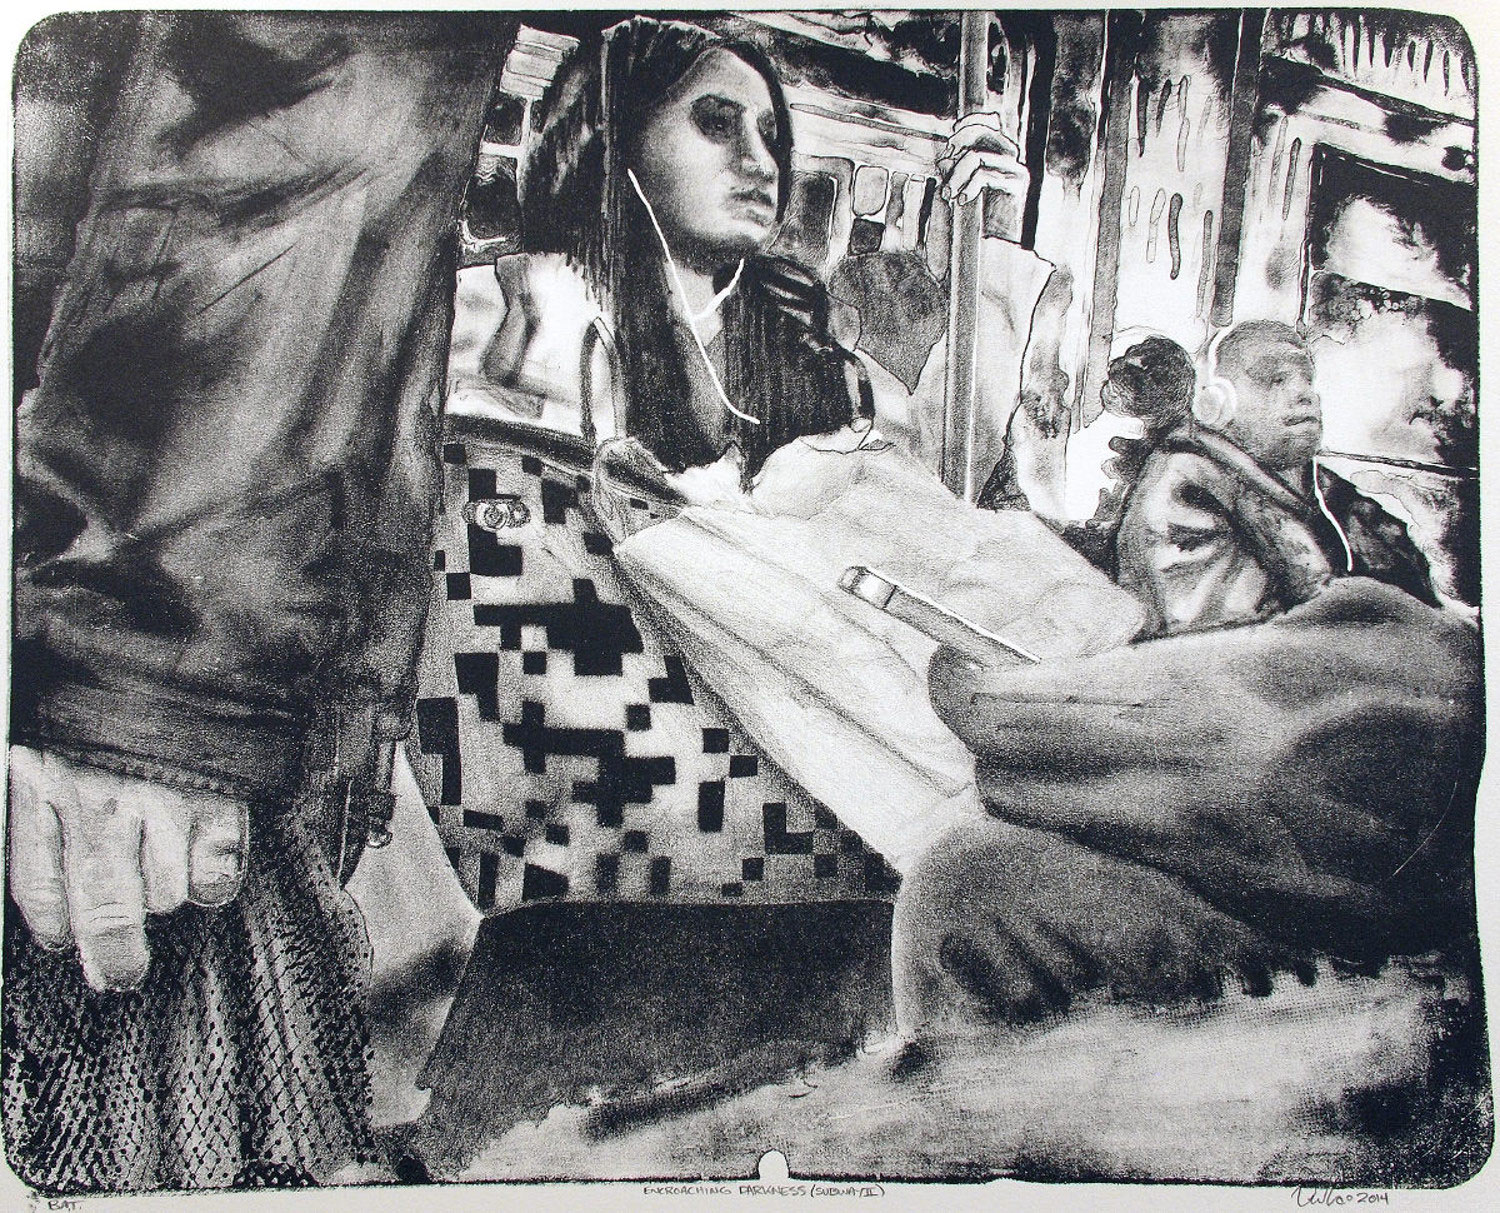 Veronica Ceci, Encroaching Darkness (Subway II), 2014. Lithograph, 18 x 24 in.